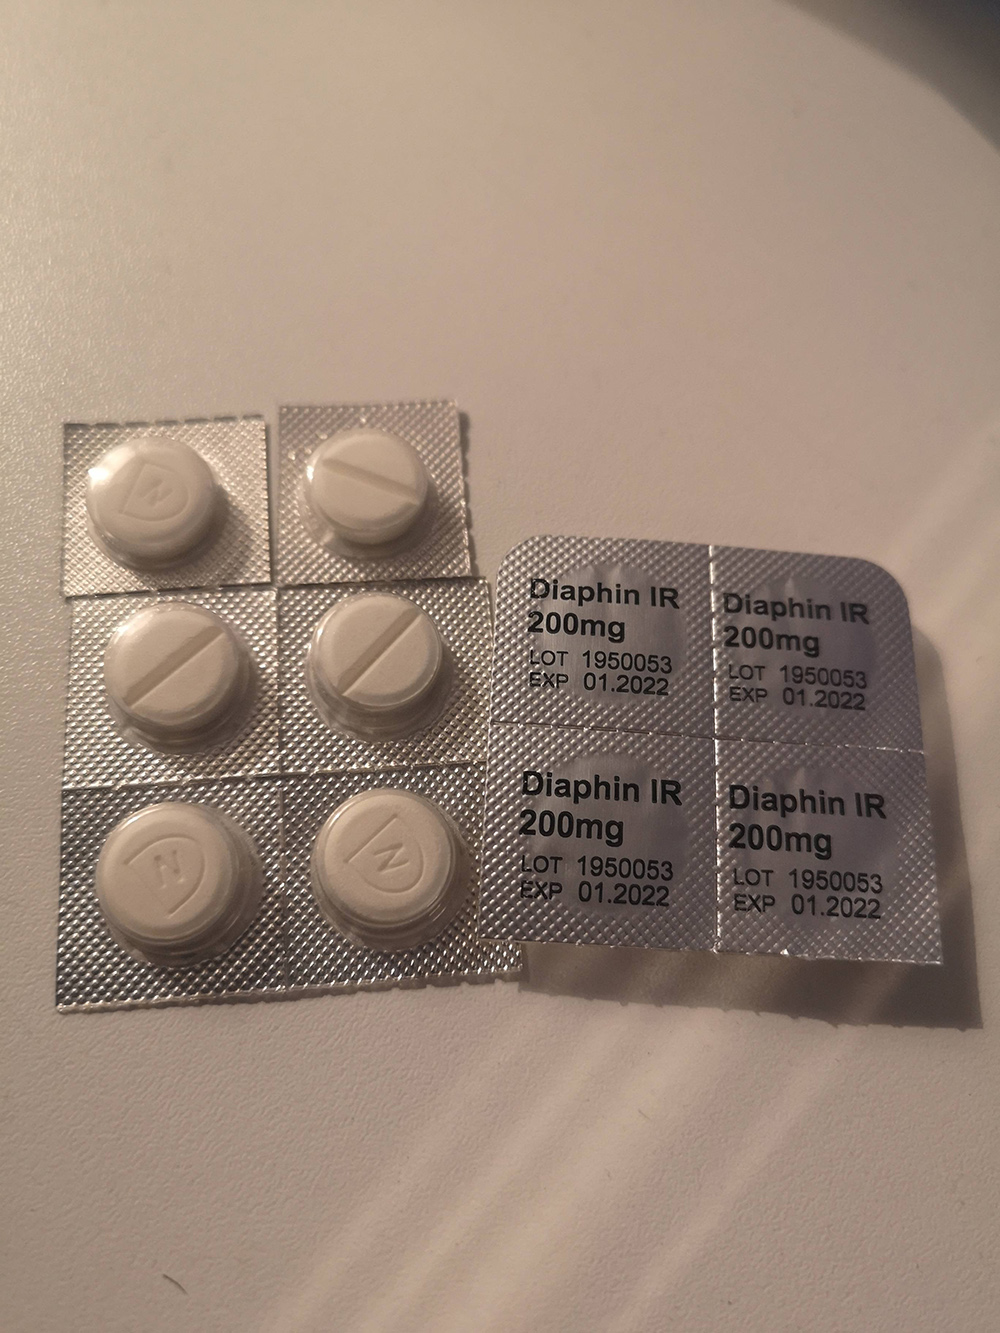 Diaphin 200mg (Diacetylmorphine) for Sale